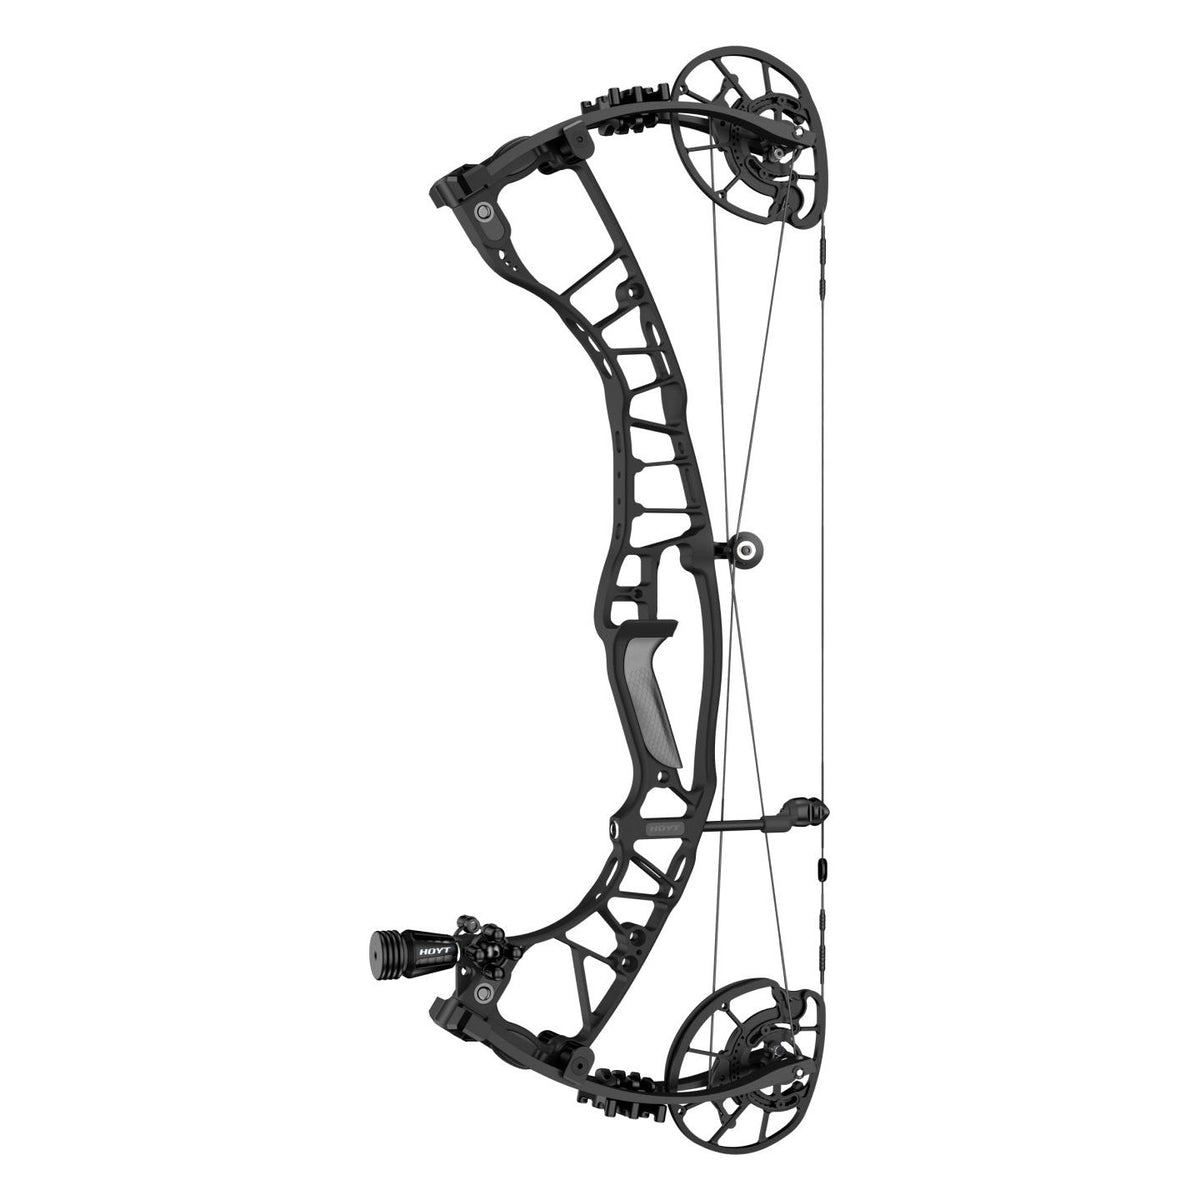 Hoyt Ventum 33 Compound In Stock